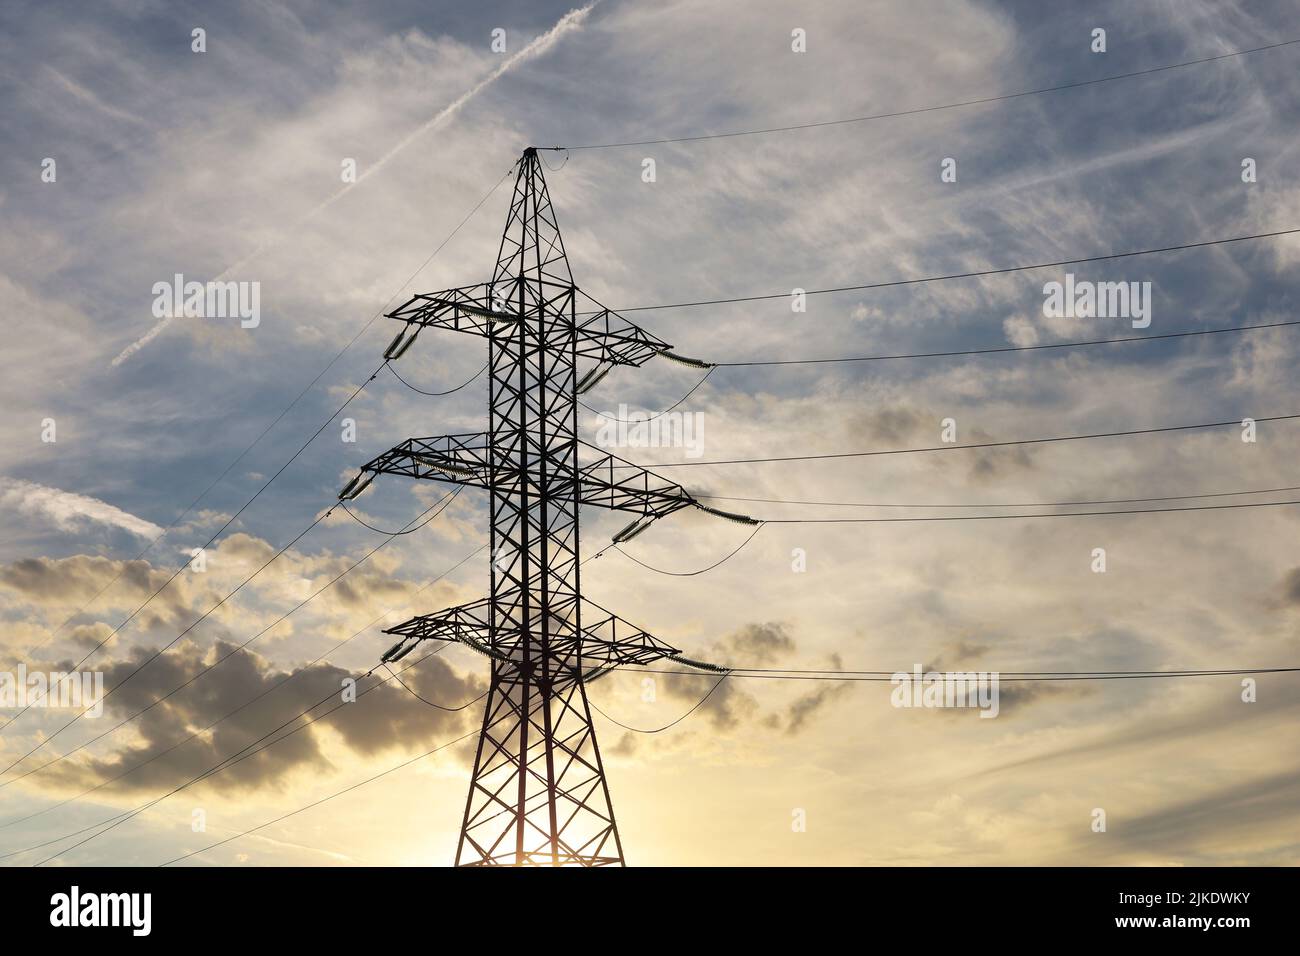 Silhouette of high voltage tower with electrical wires on background of sunset sky and clouds. Electricity transmission lines, power supply concept Stock Photo